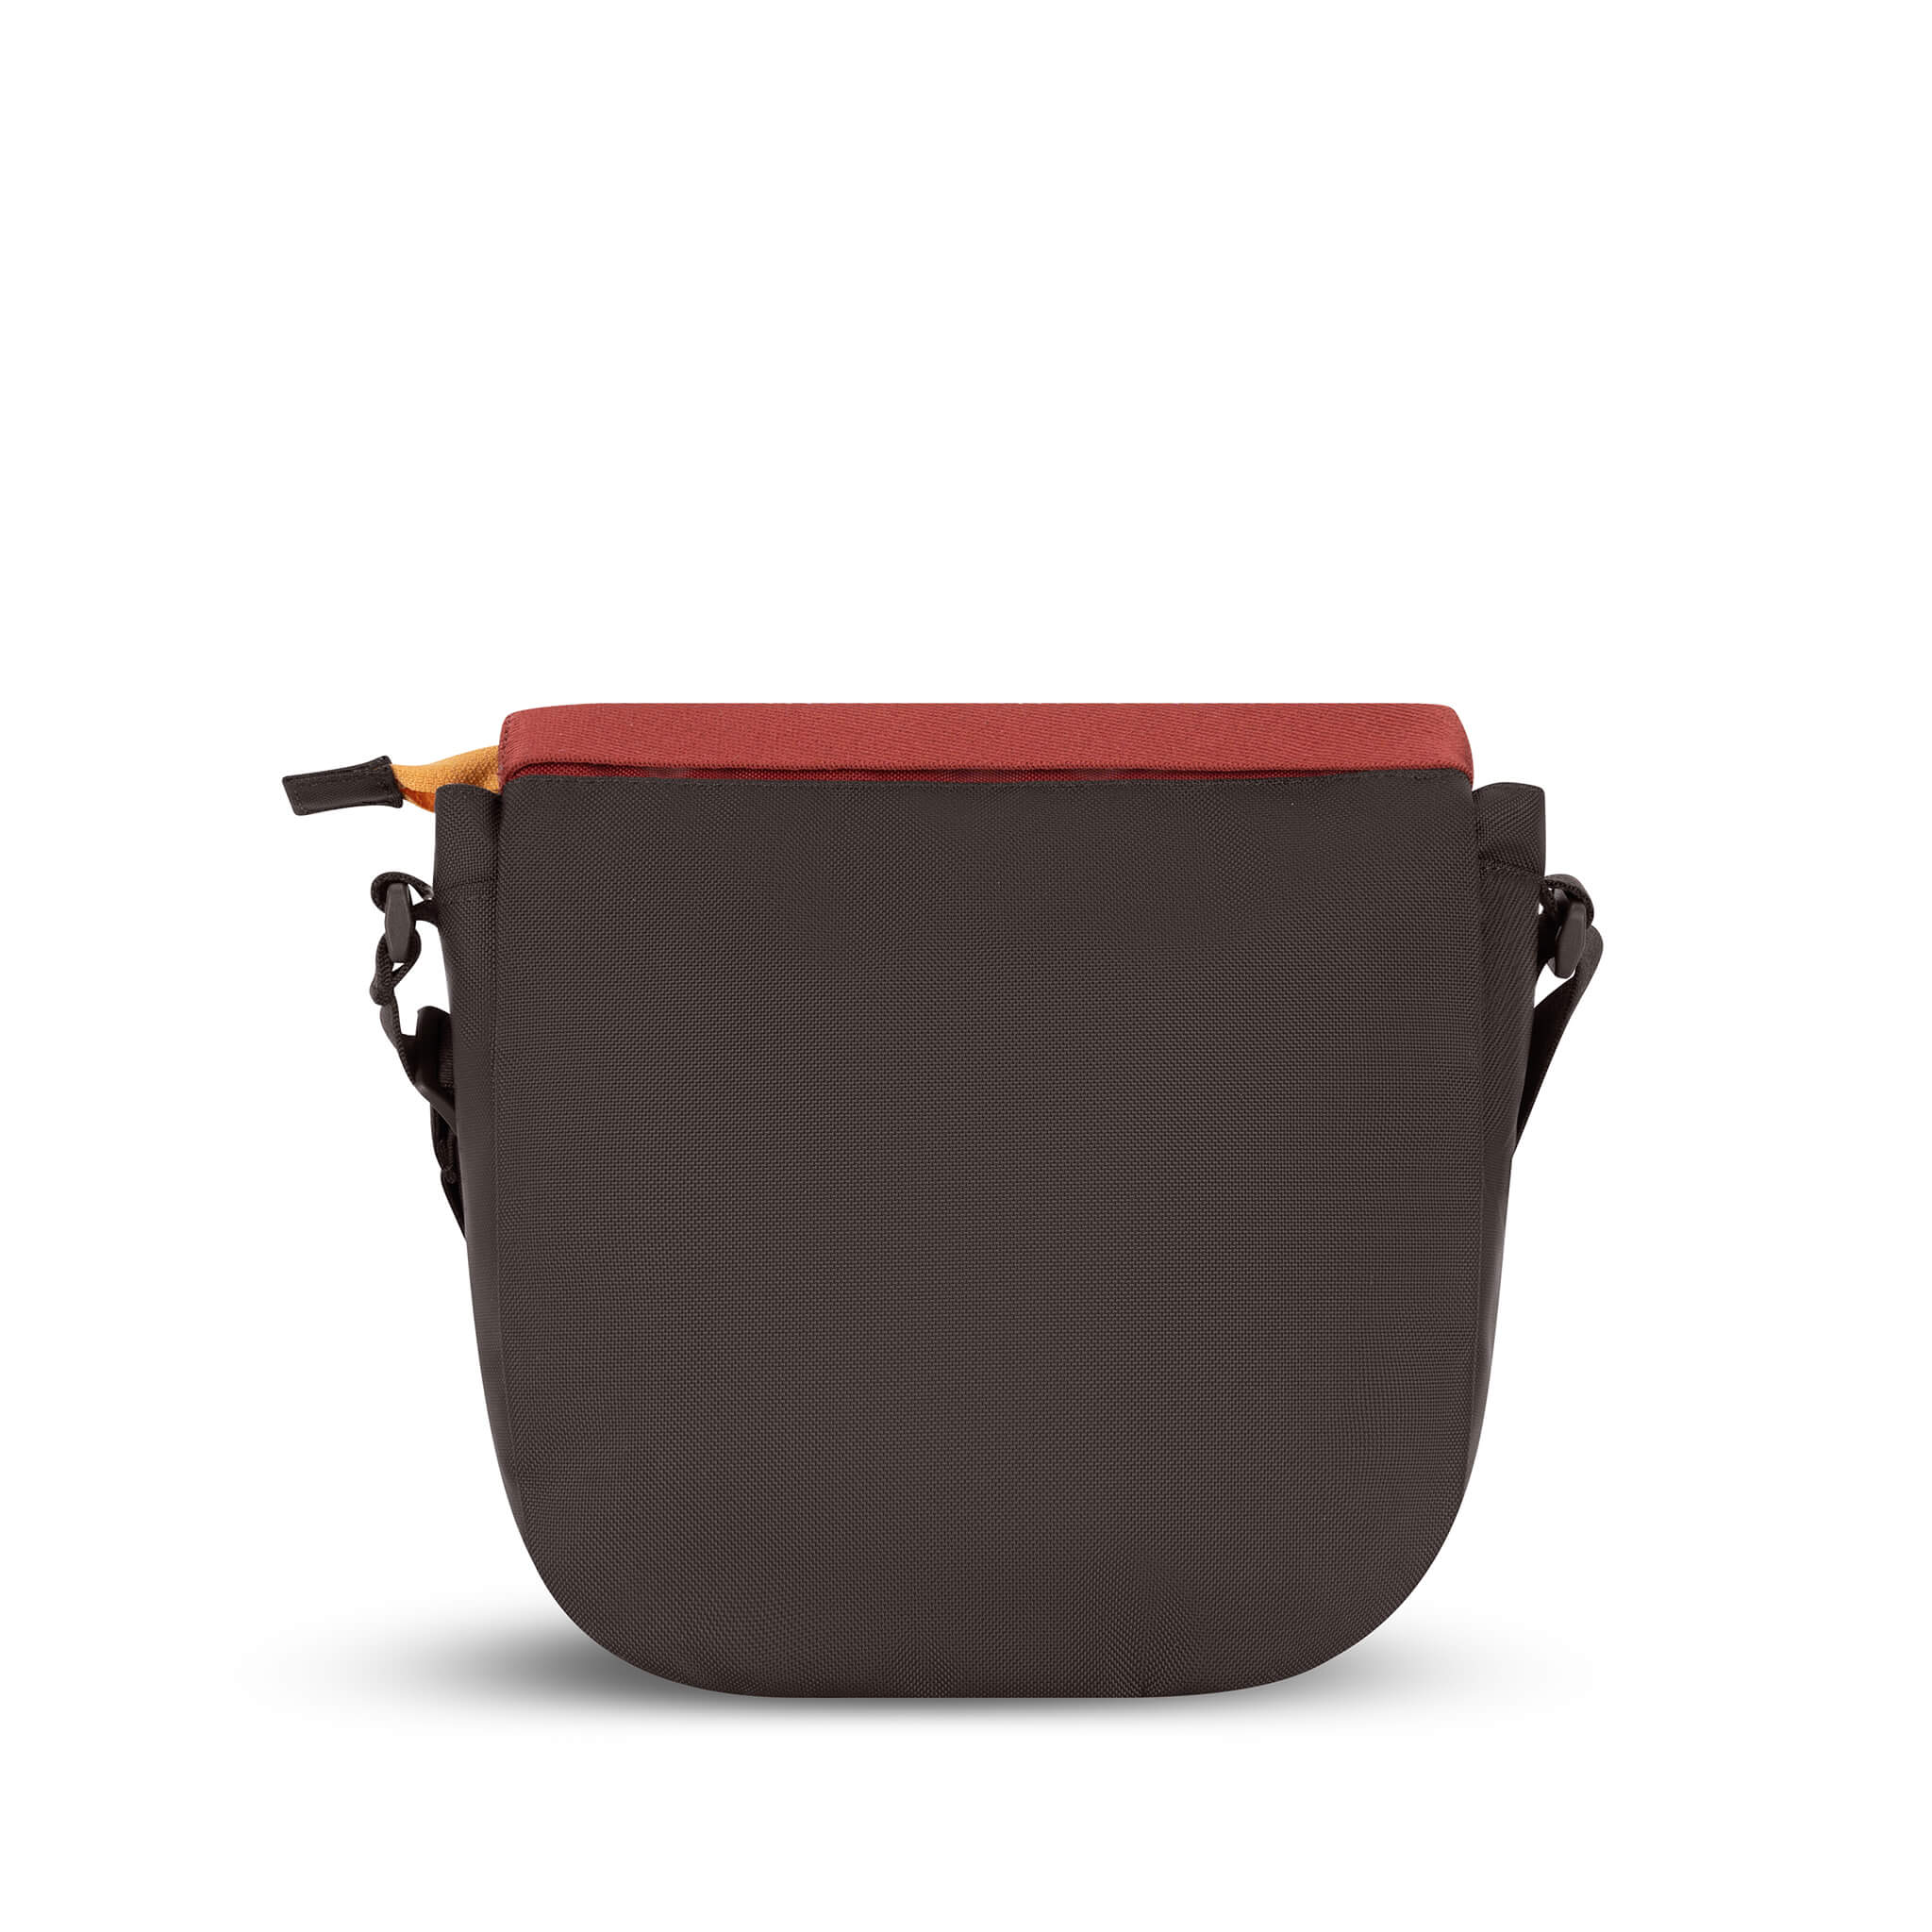 Back view of Sherpani messenger satchel bag, the Milli in Cider. Milli features include an adjustable crossbody strap, front zipper pocket, brimmed zipper pocket, detachable keychain, magnetic closure, RFID security and multiple internal pockets for organization. The Cider color is two-toned in burgundy and dark brown with yellow accents. 